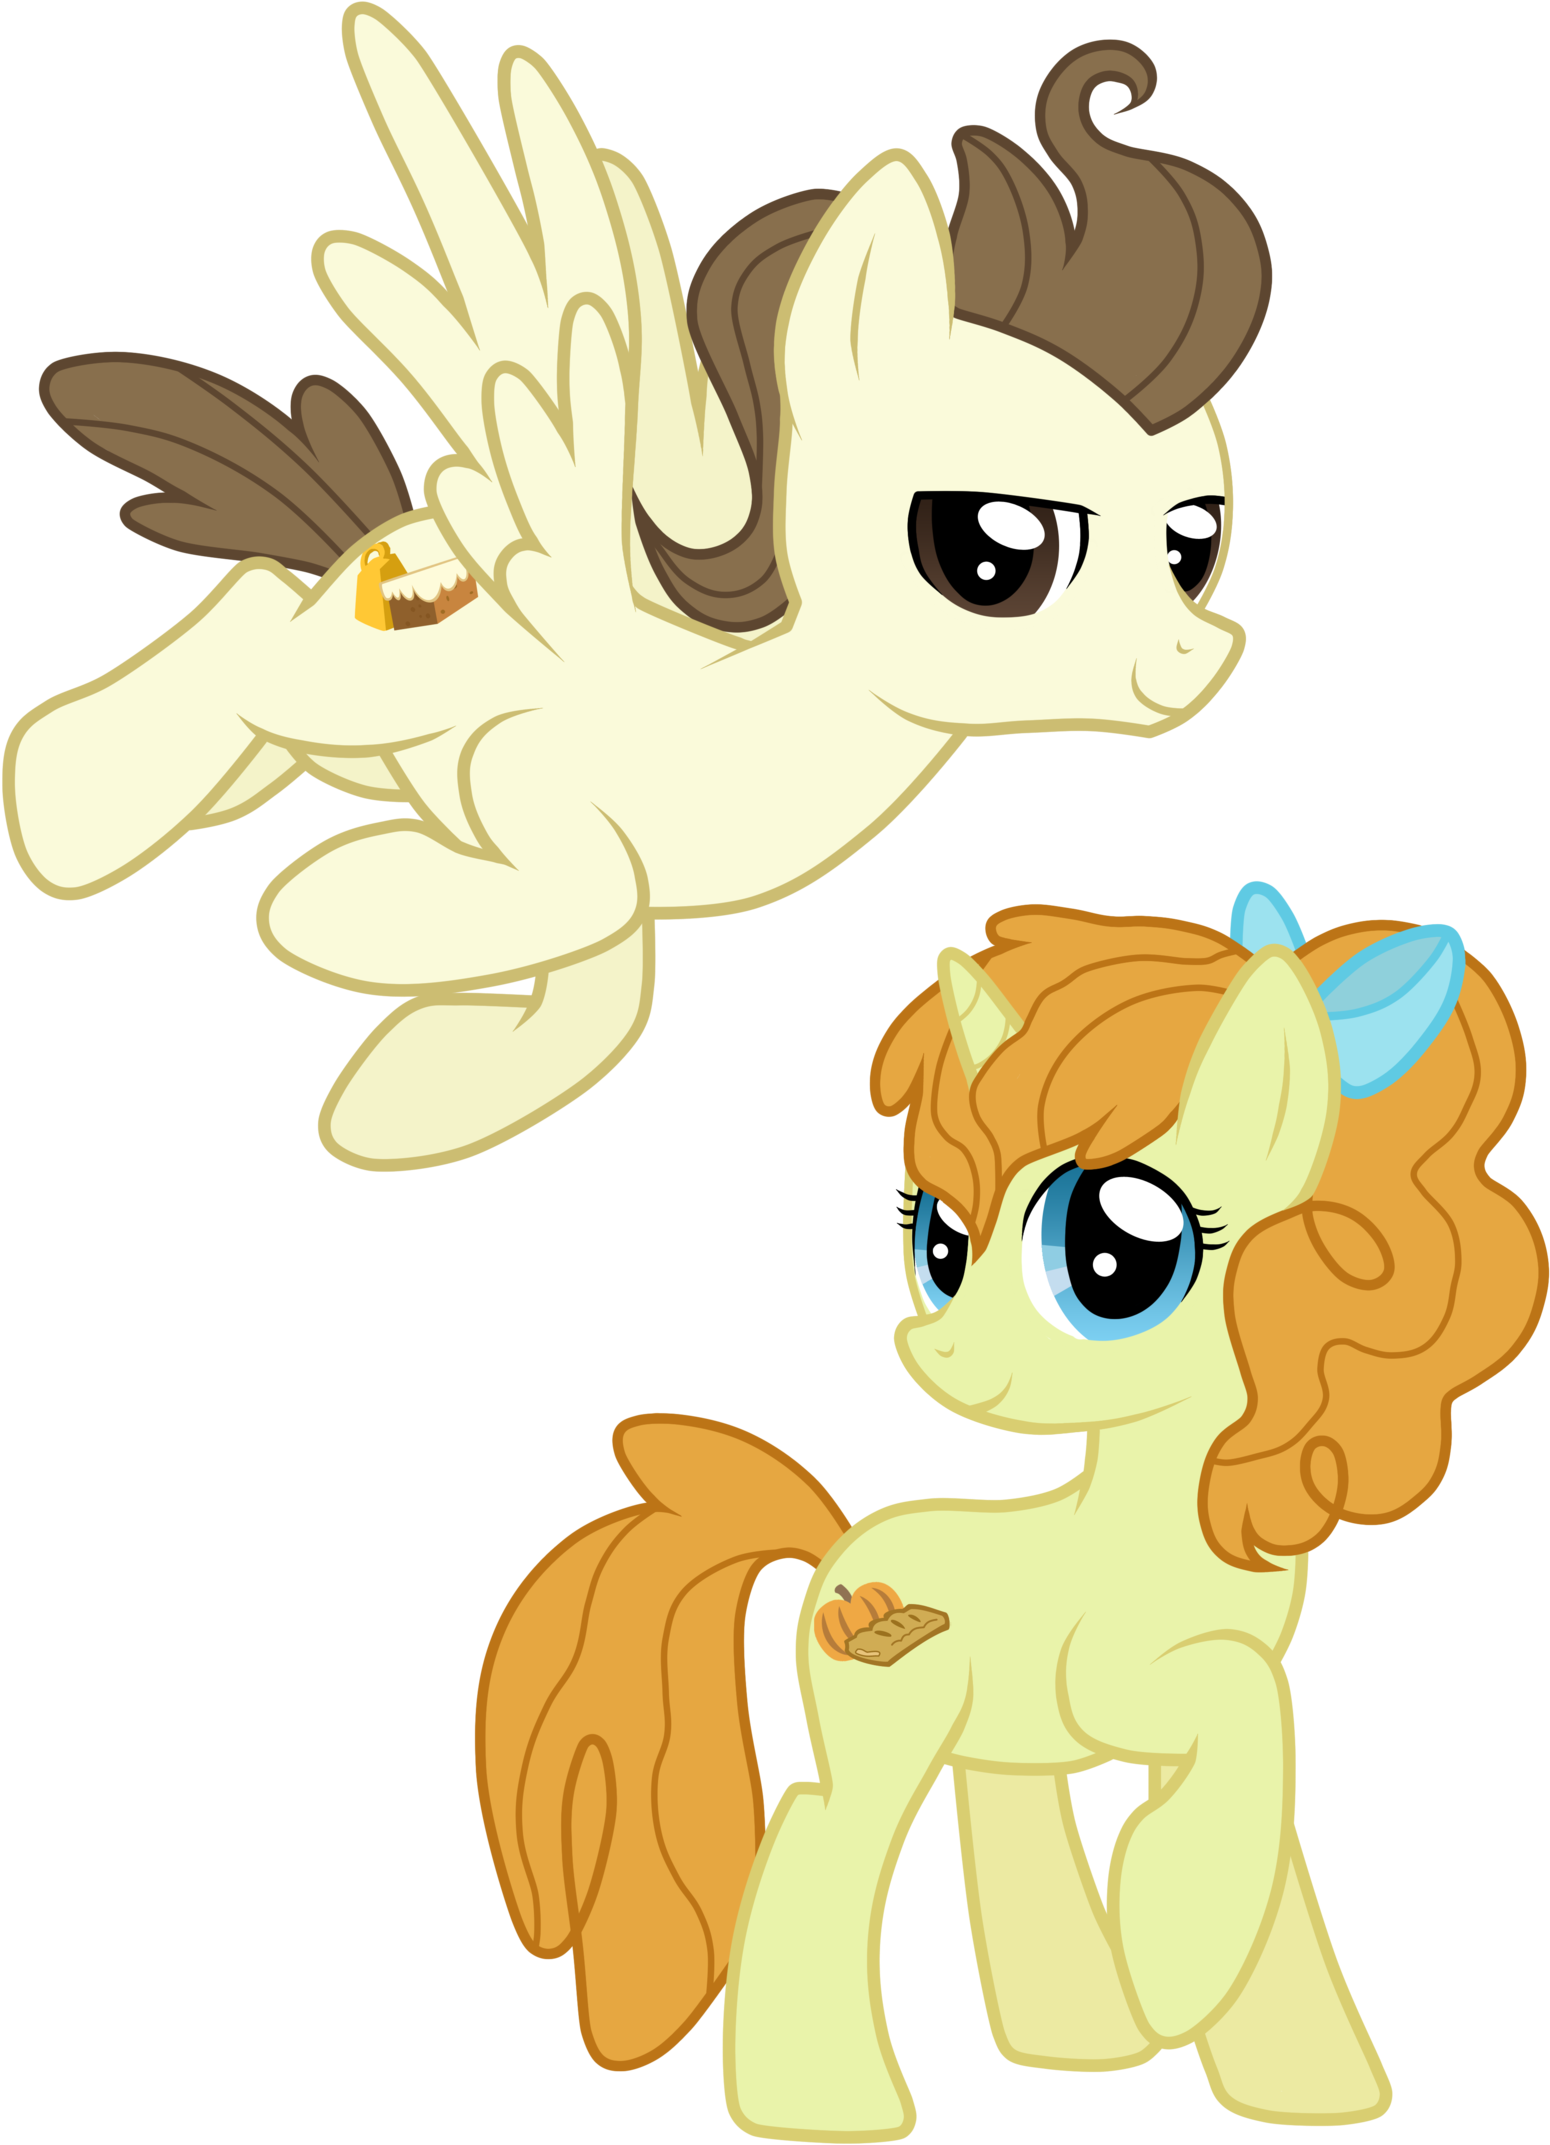 Cakes Grown Up By Jennieoo Cakes Grown Up By Jennieoo - Mlp Pound Cake And Pumpkin Cake Grown Up (1600x2199)